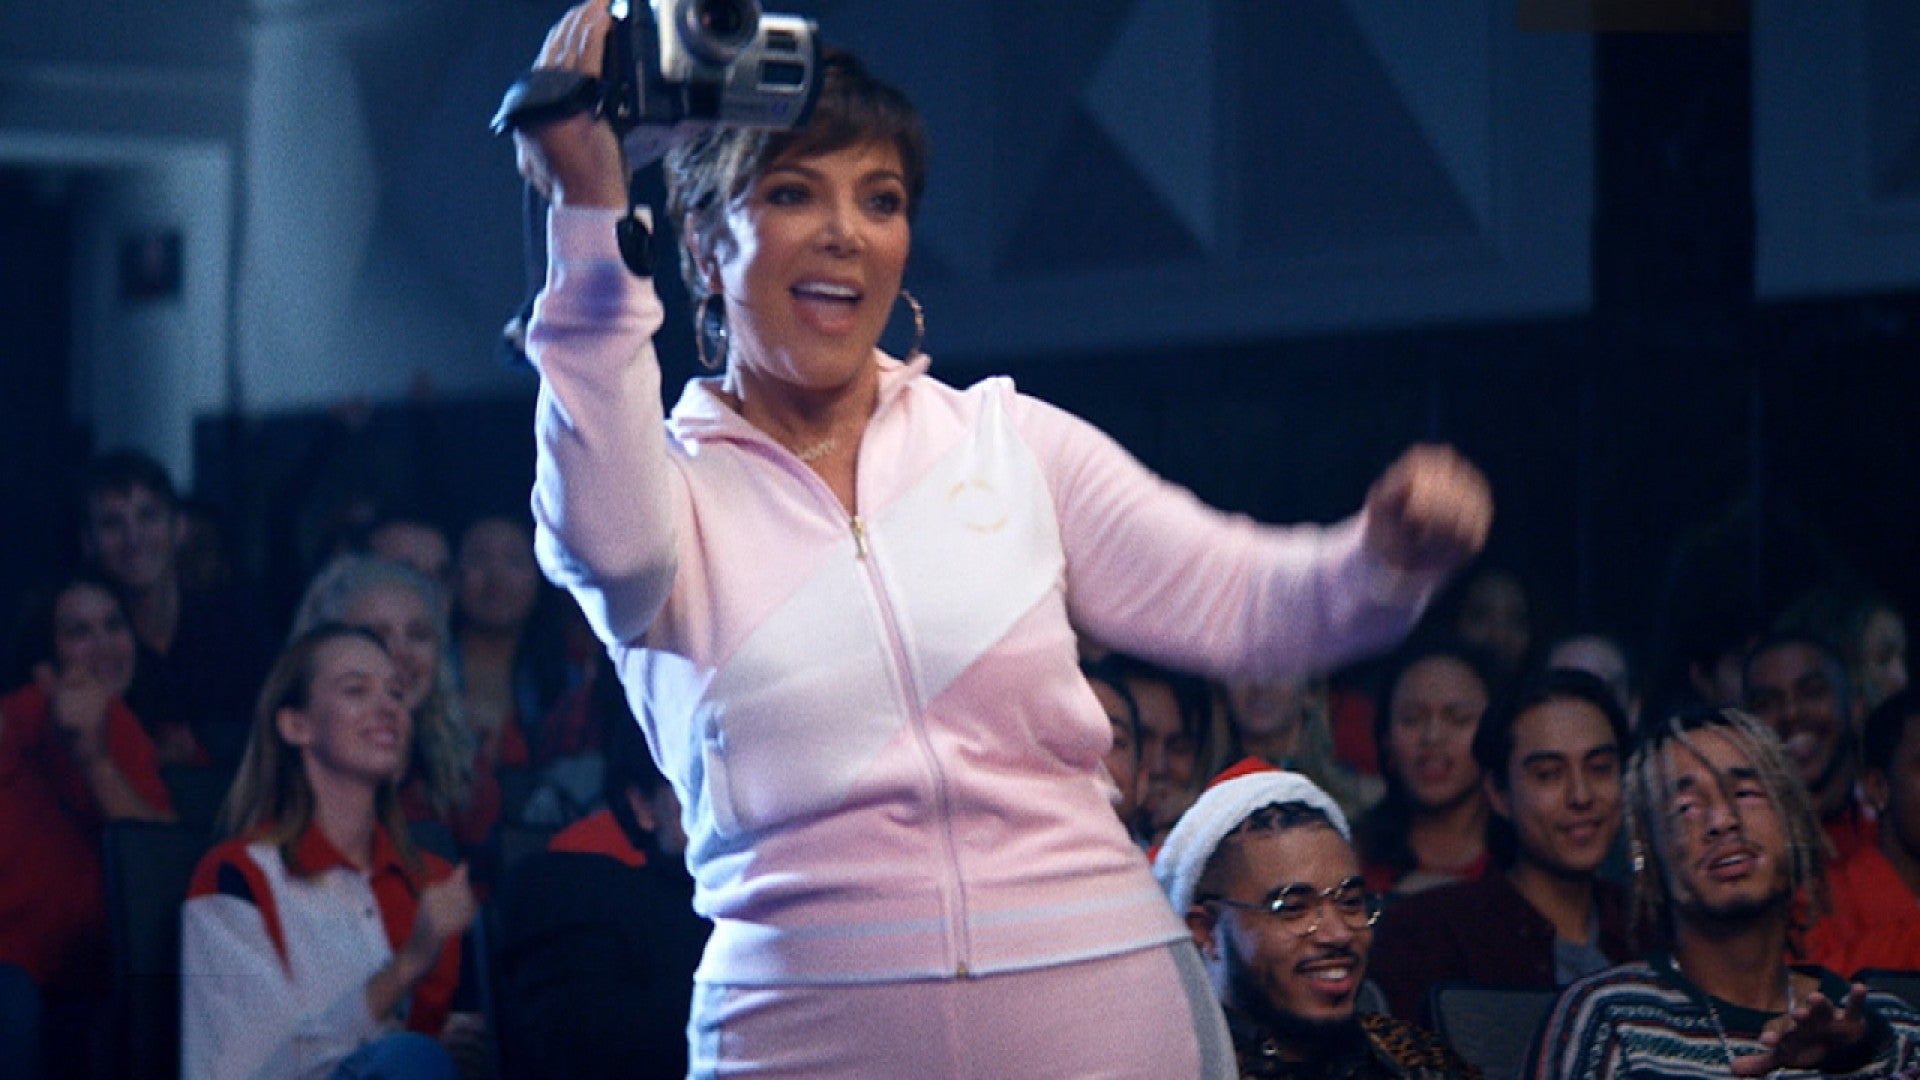 Kris Jenner Is The Standout Star In Ariana Grandes Thank U